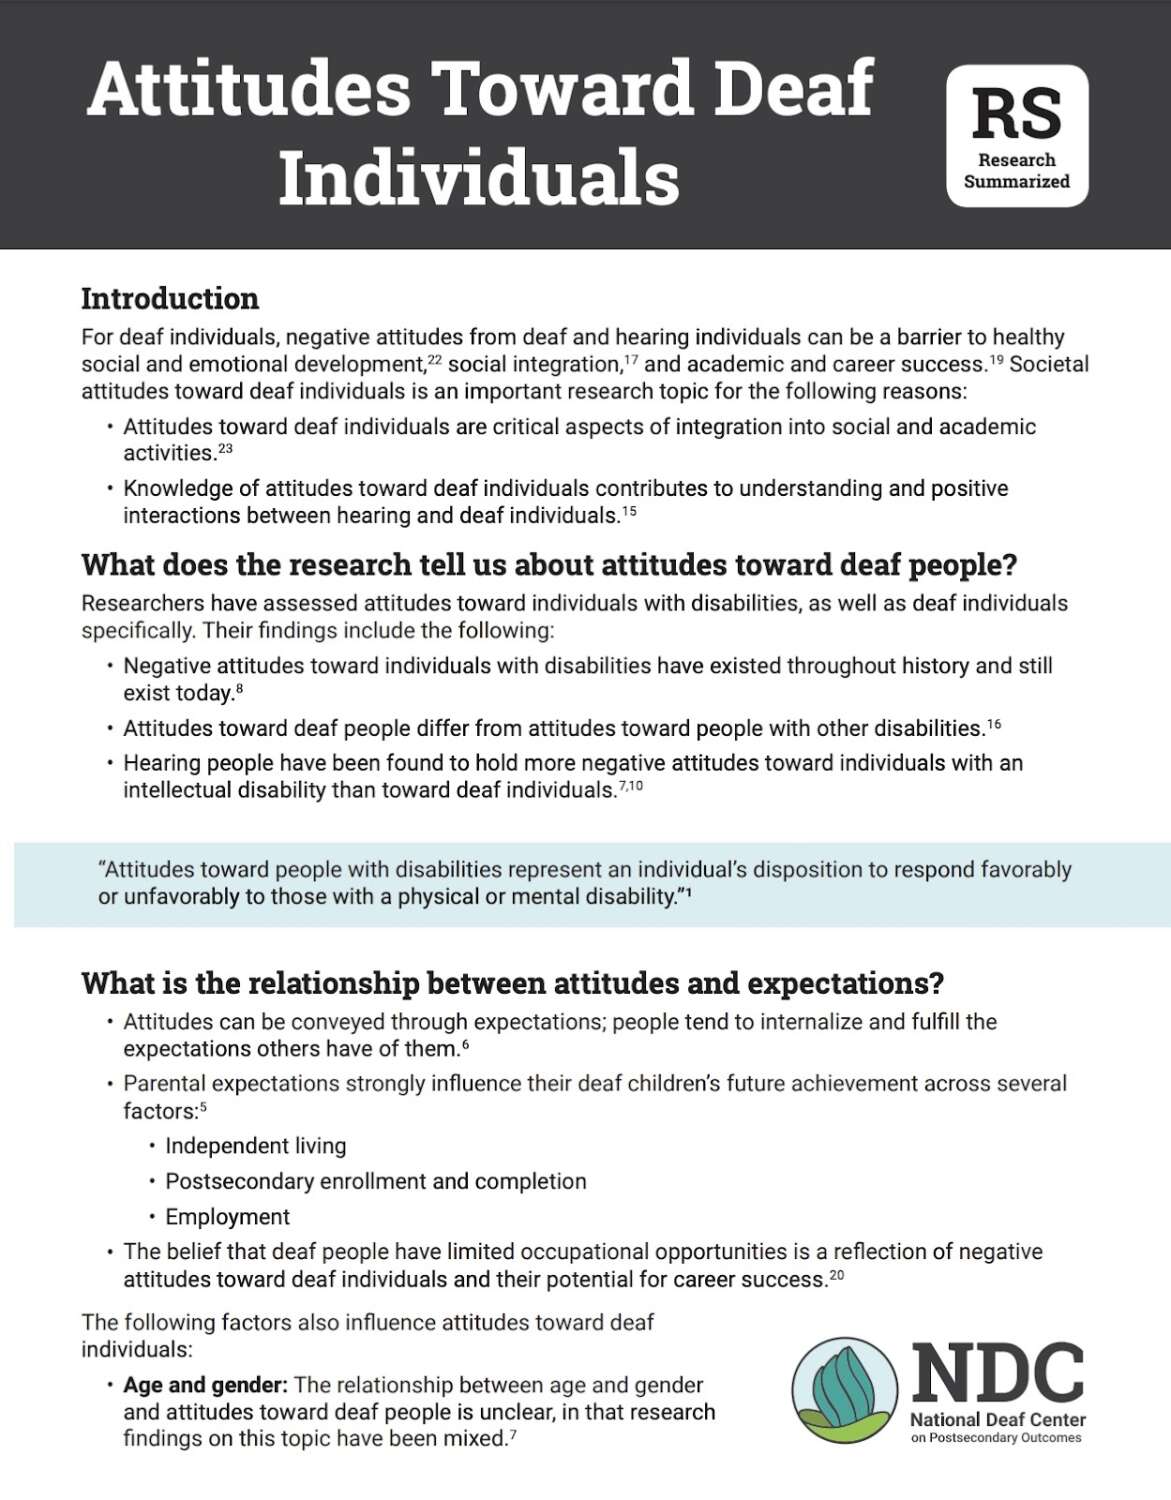 This is a screenshot of a document discussing attitudes toward deaf individuals. The text covers research findings about societal attitudes, the relationship between attitudes and expectations, and factors influencing attitudes toward deaf individuals. The document emphasizes the importance of understanding and promoting positive interactions between hearing and deaf individuals.